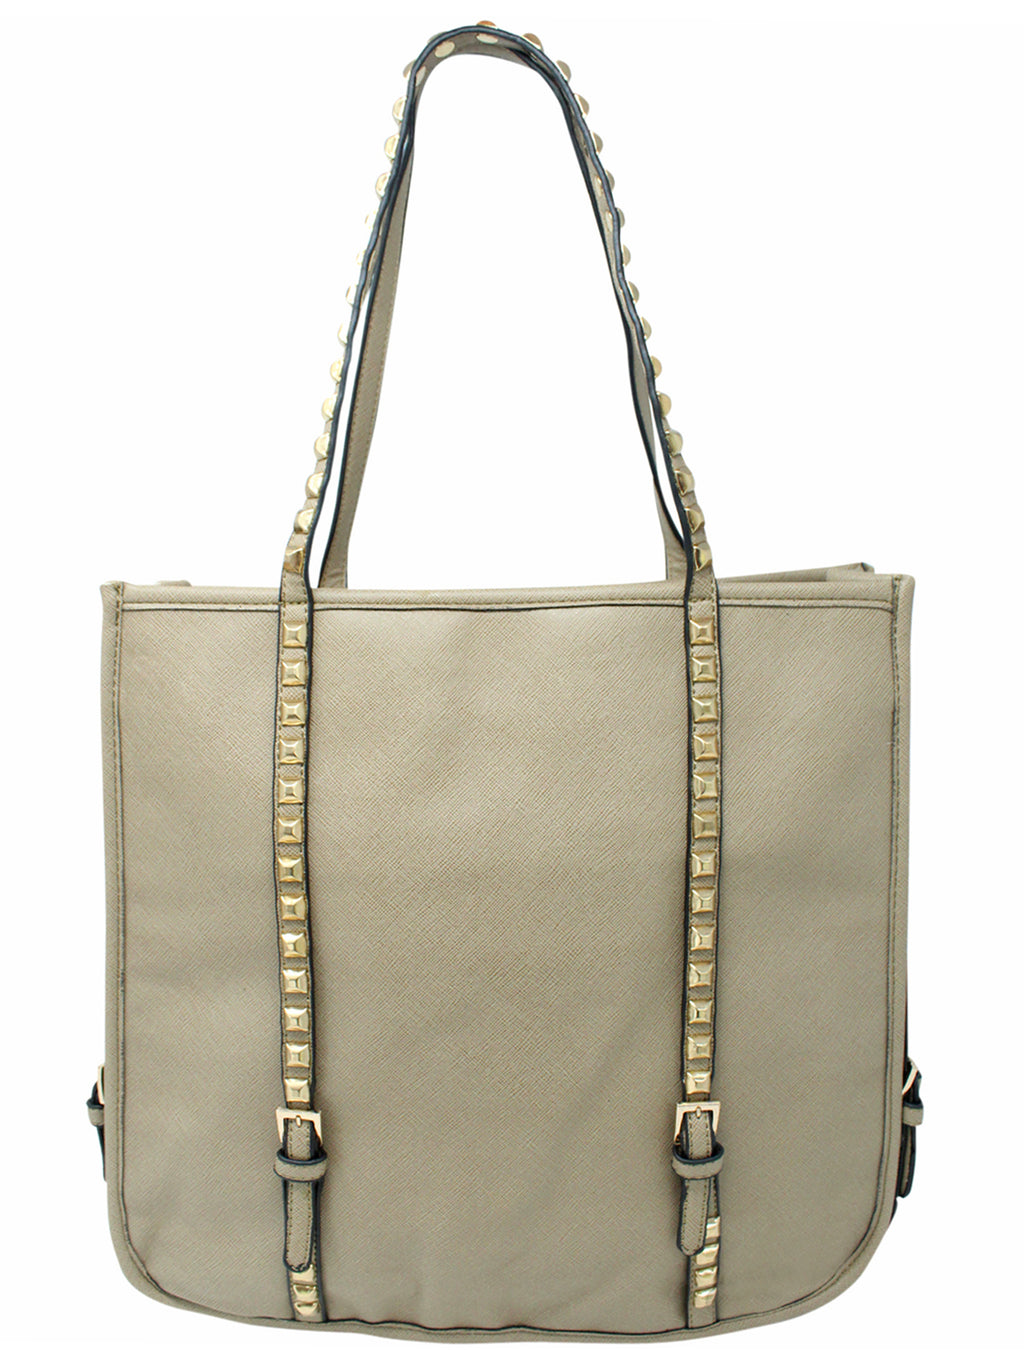 Tote Bag With Long Studded Straps